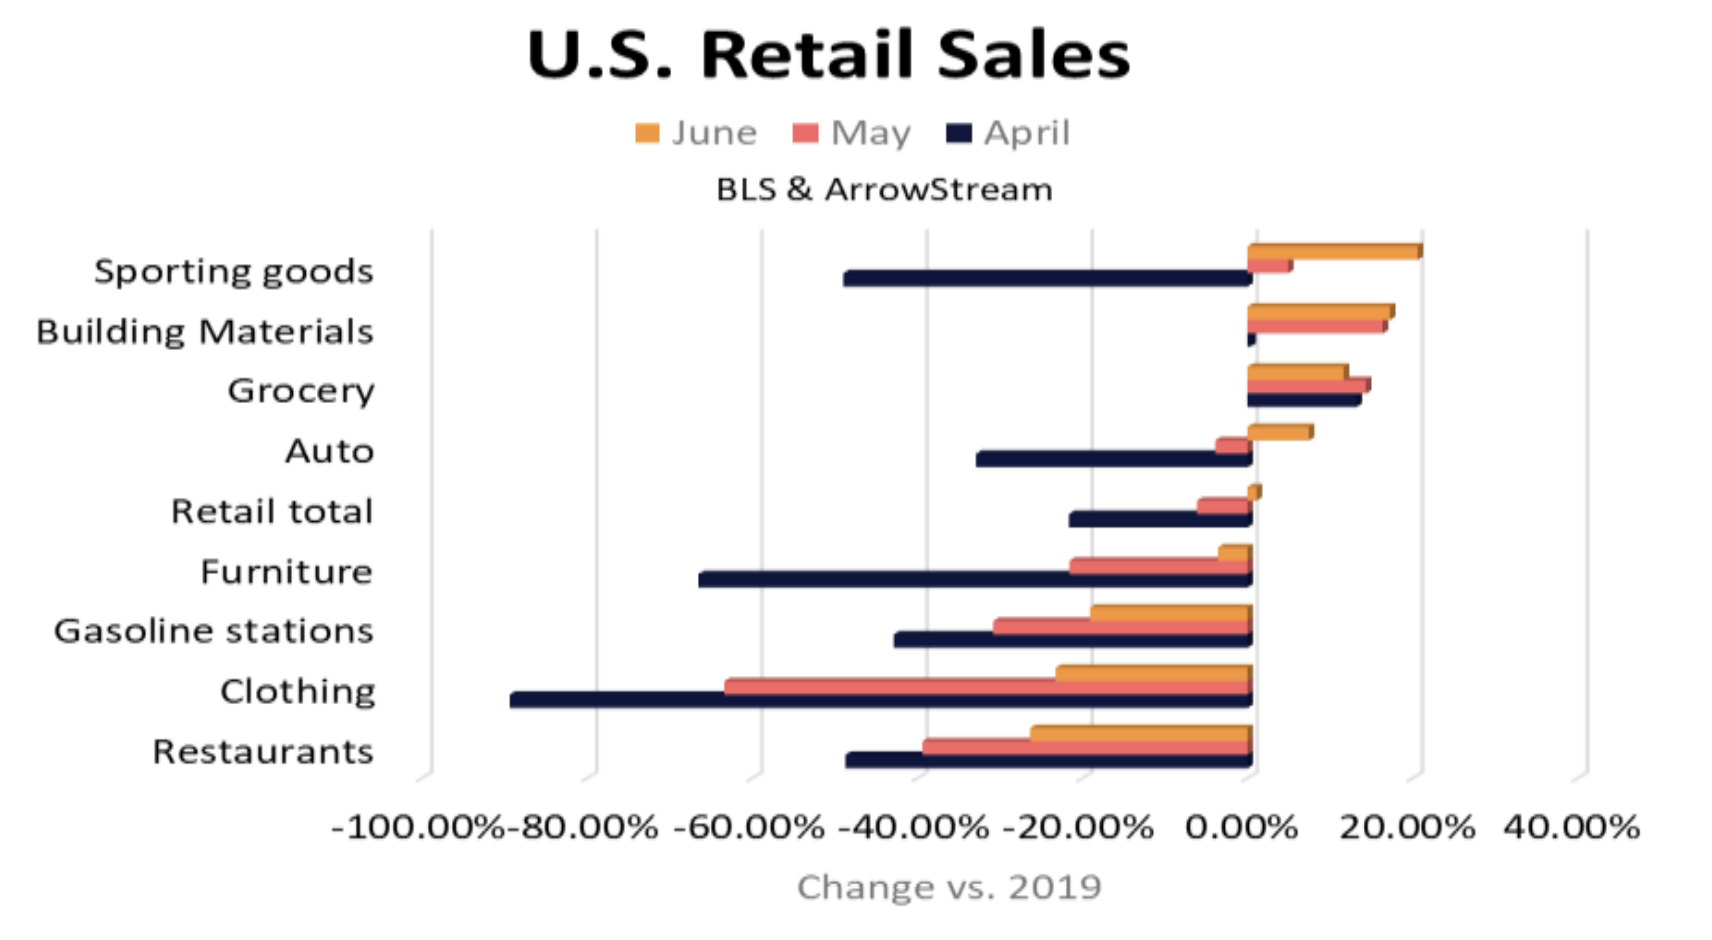 US retail sales by business segment